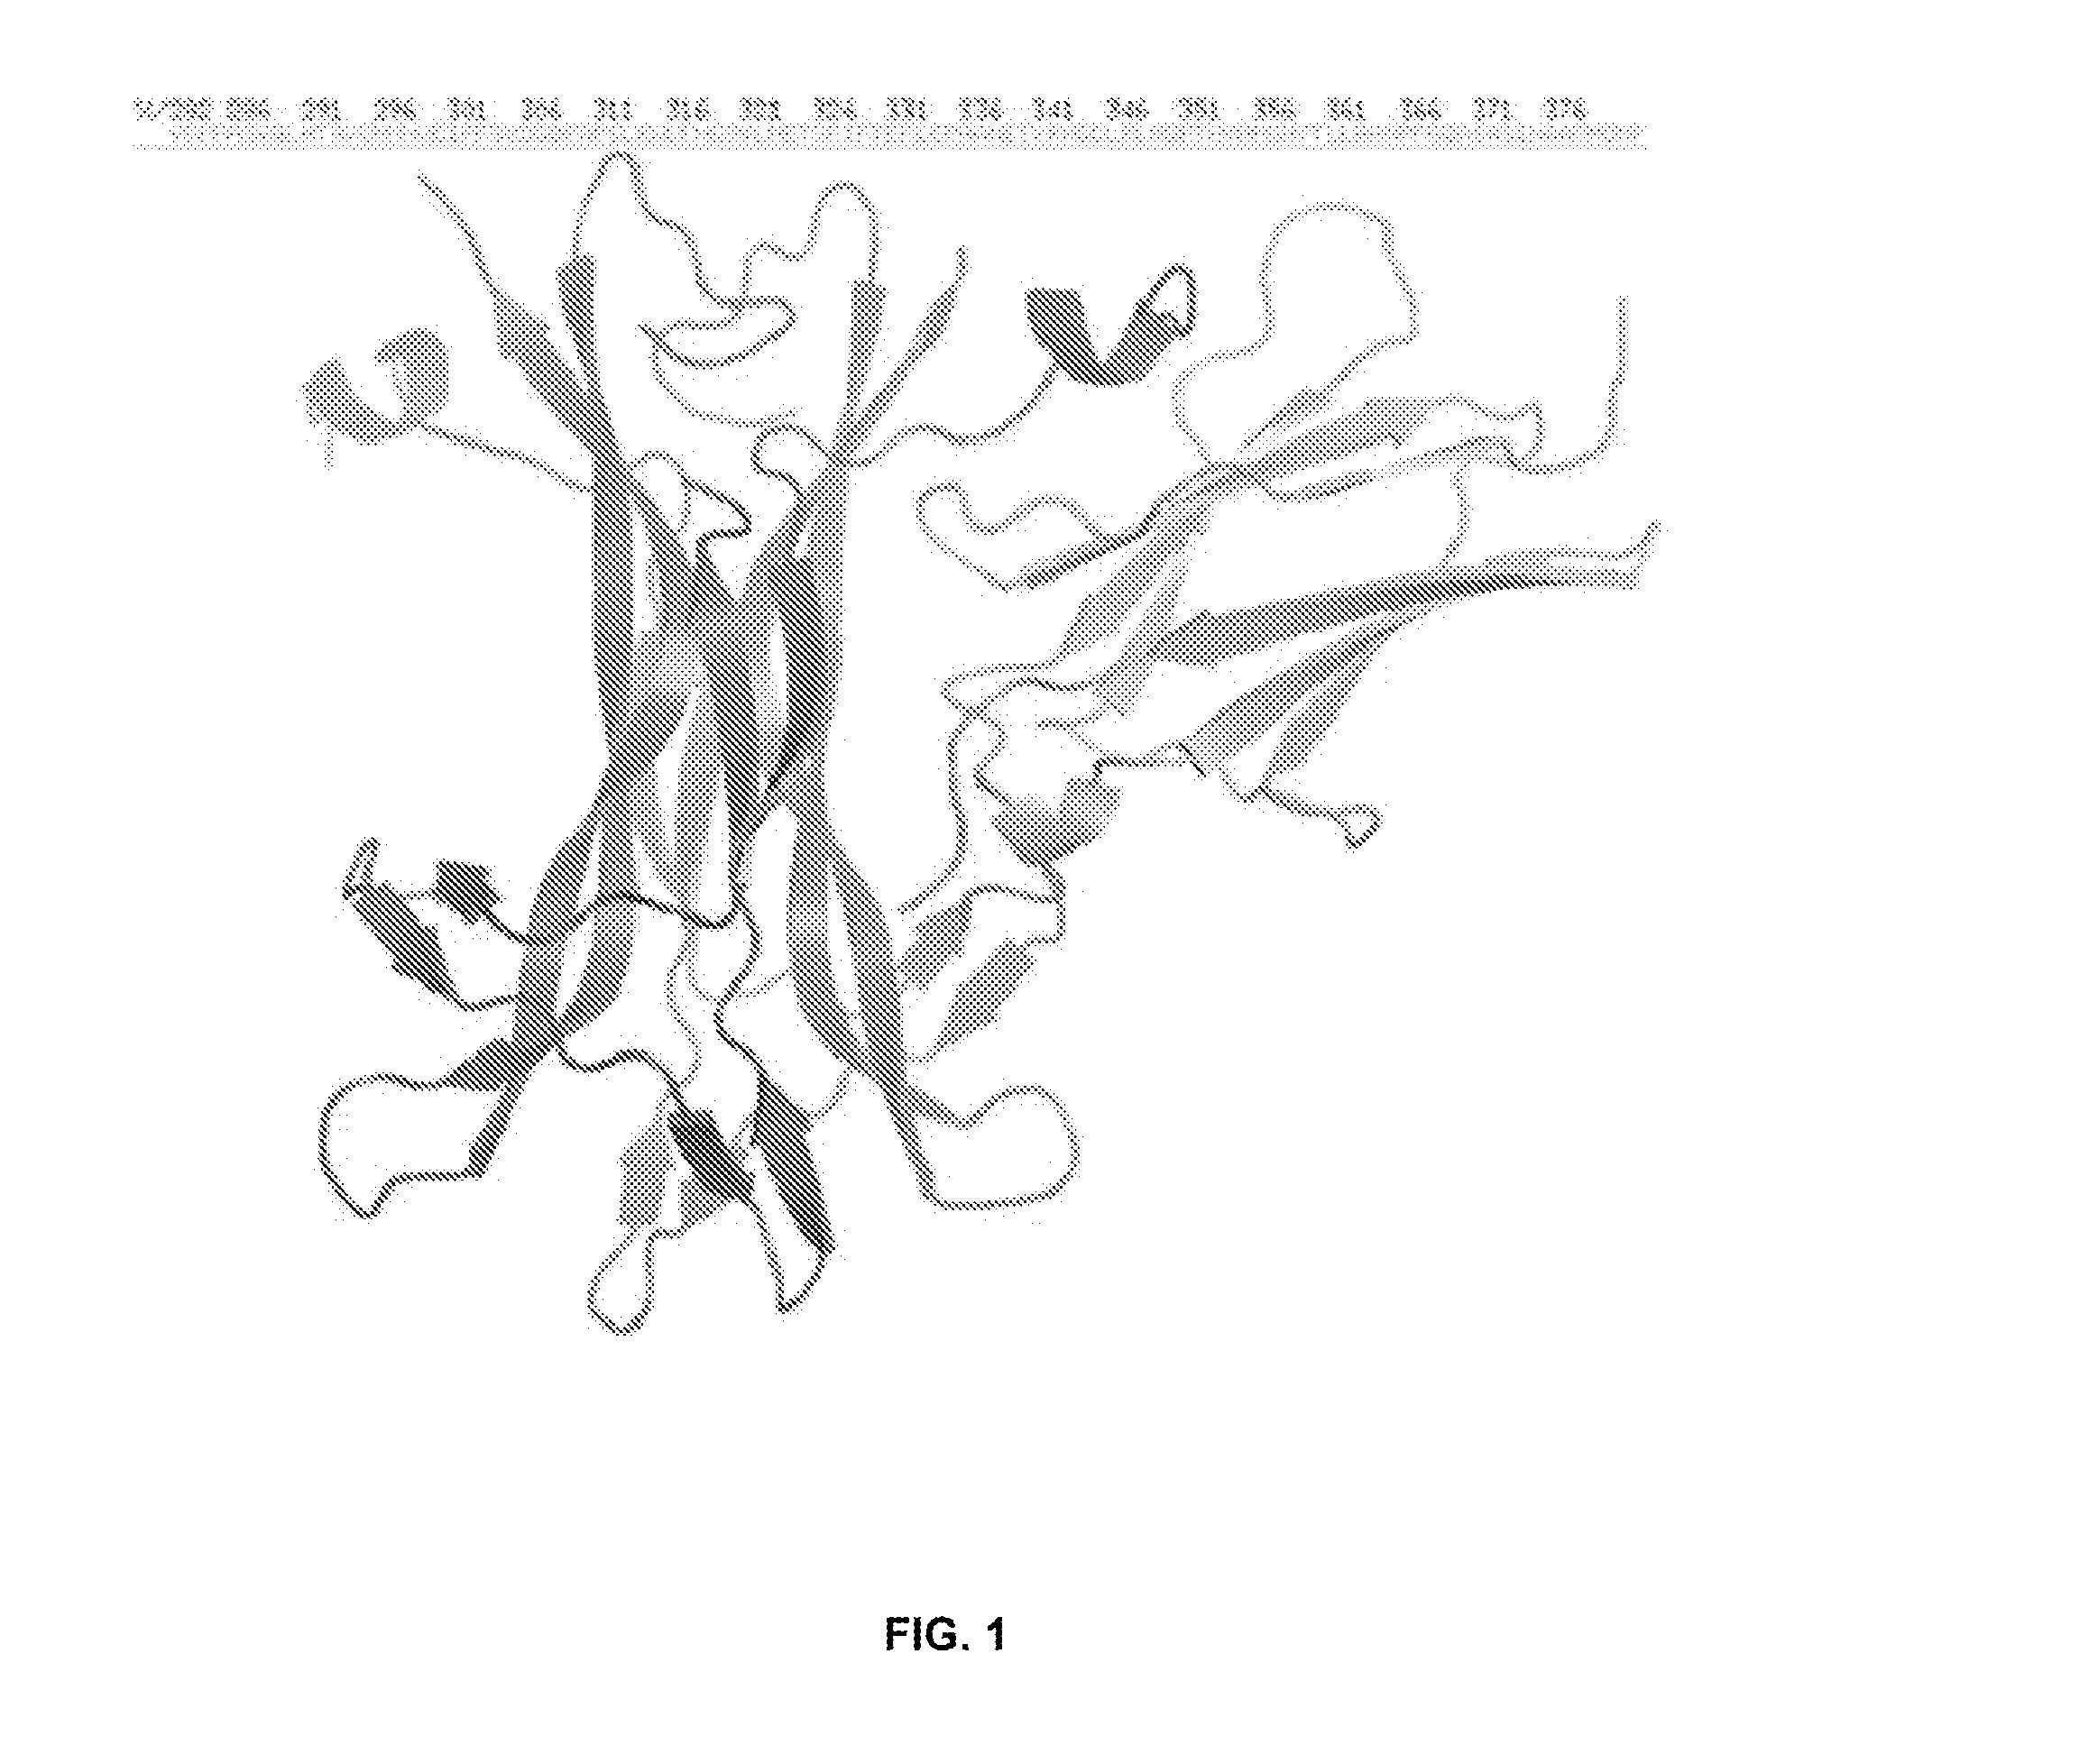 Anti-trka antibodies, derivatives and uses thereof